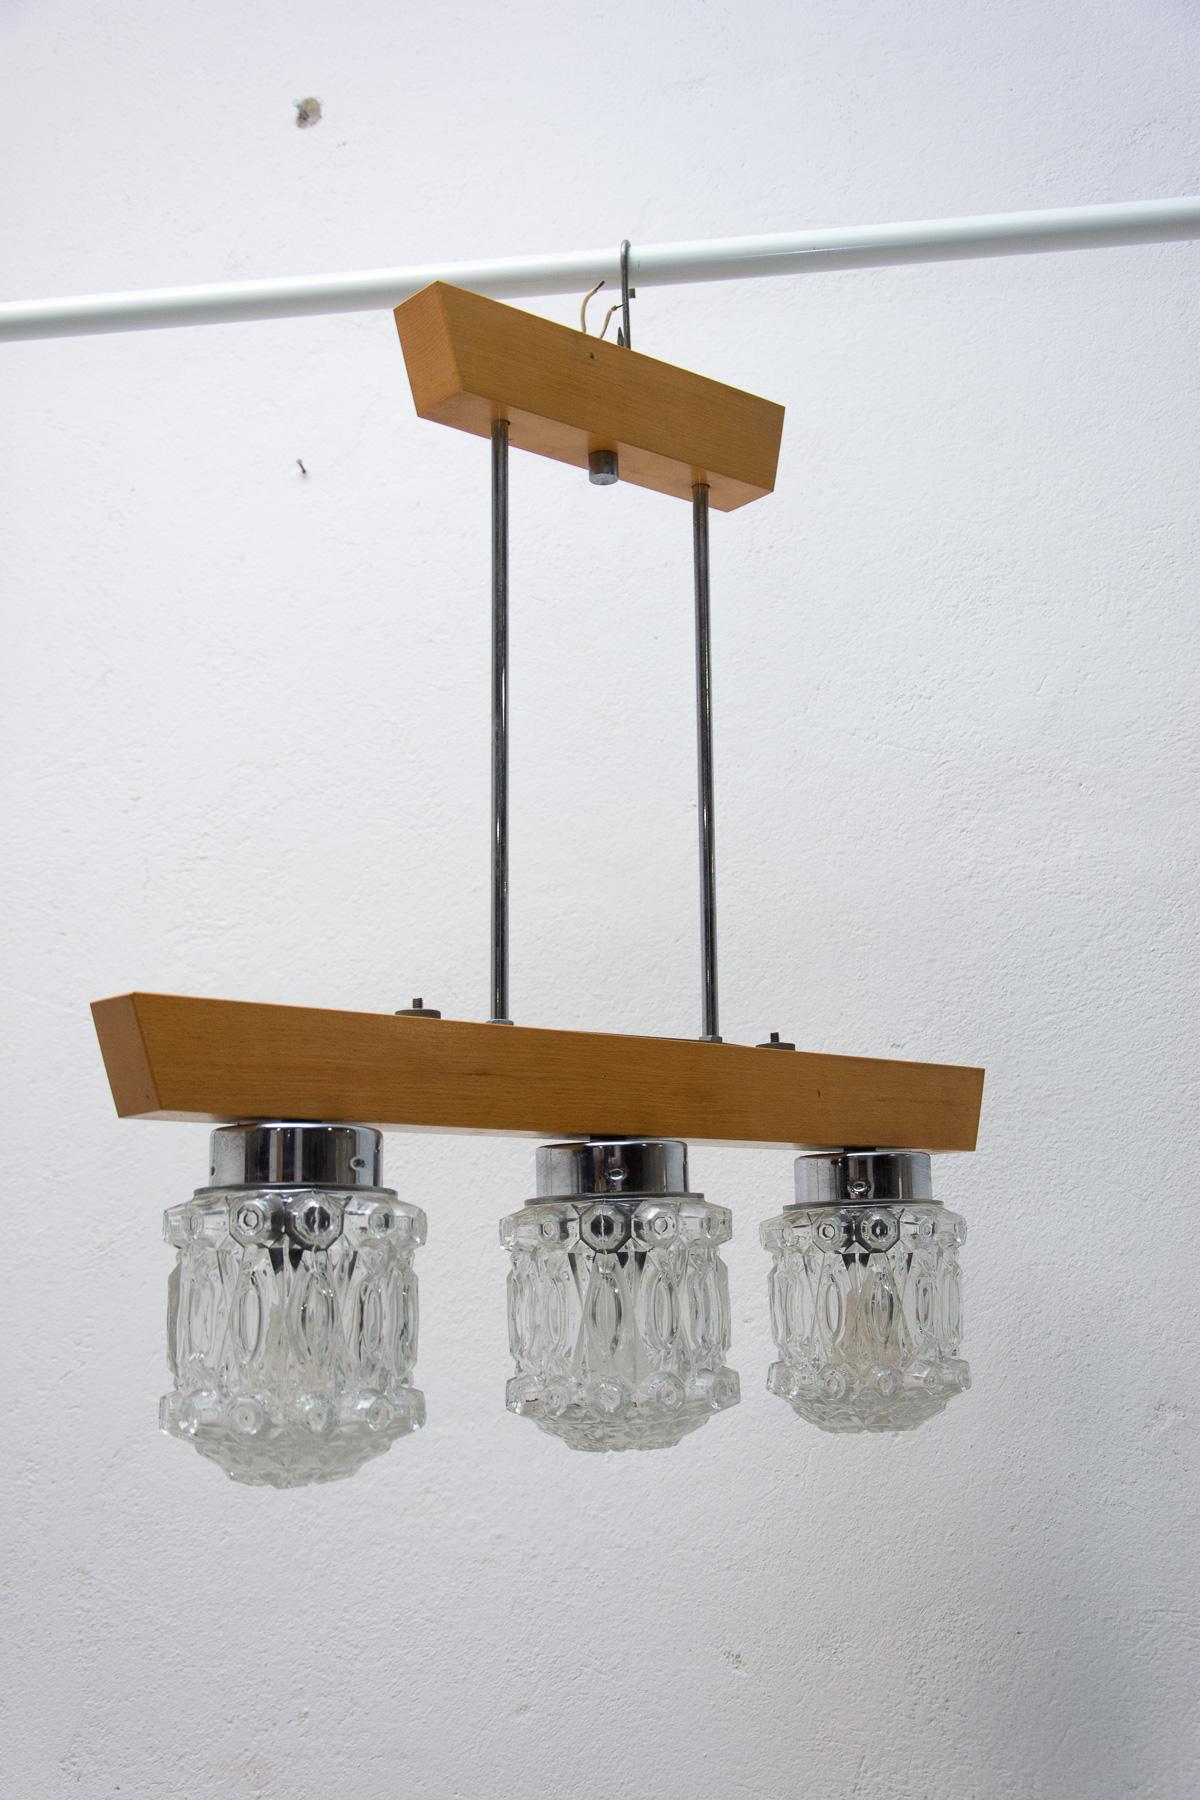 This chandelier comes from a Czechoslovak hotel and comes from the so-called Brutalist era of the former Eastern bloc in the 1970´s. It´s made of cut glass and wood.
It has a wooden structure and six cut glass lampshades. The pendant is in very